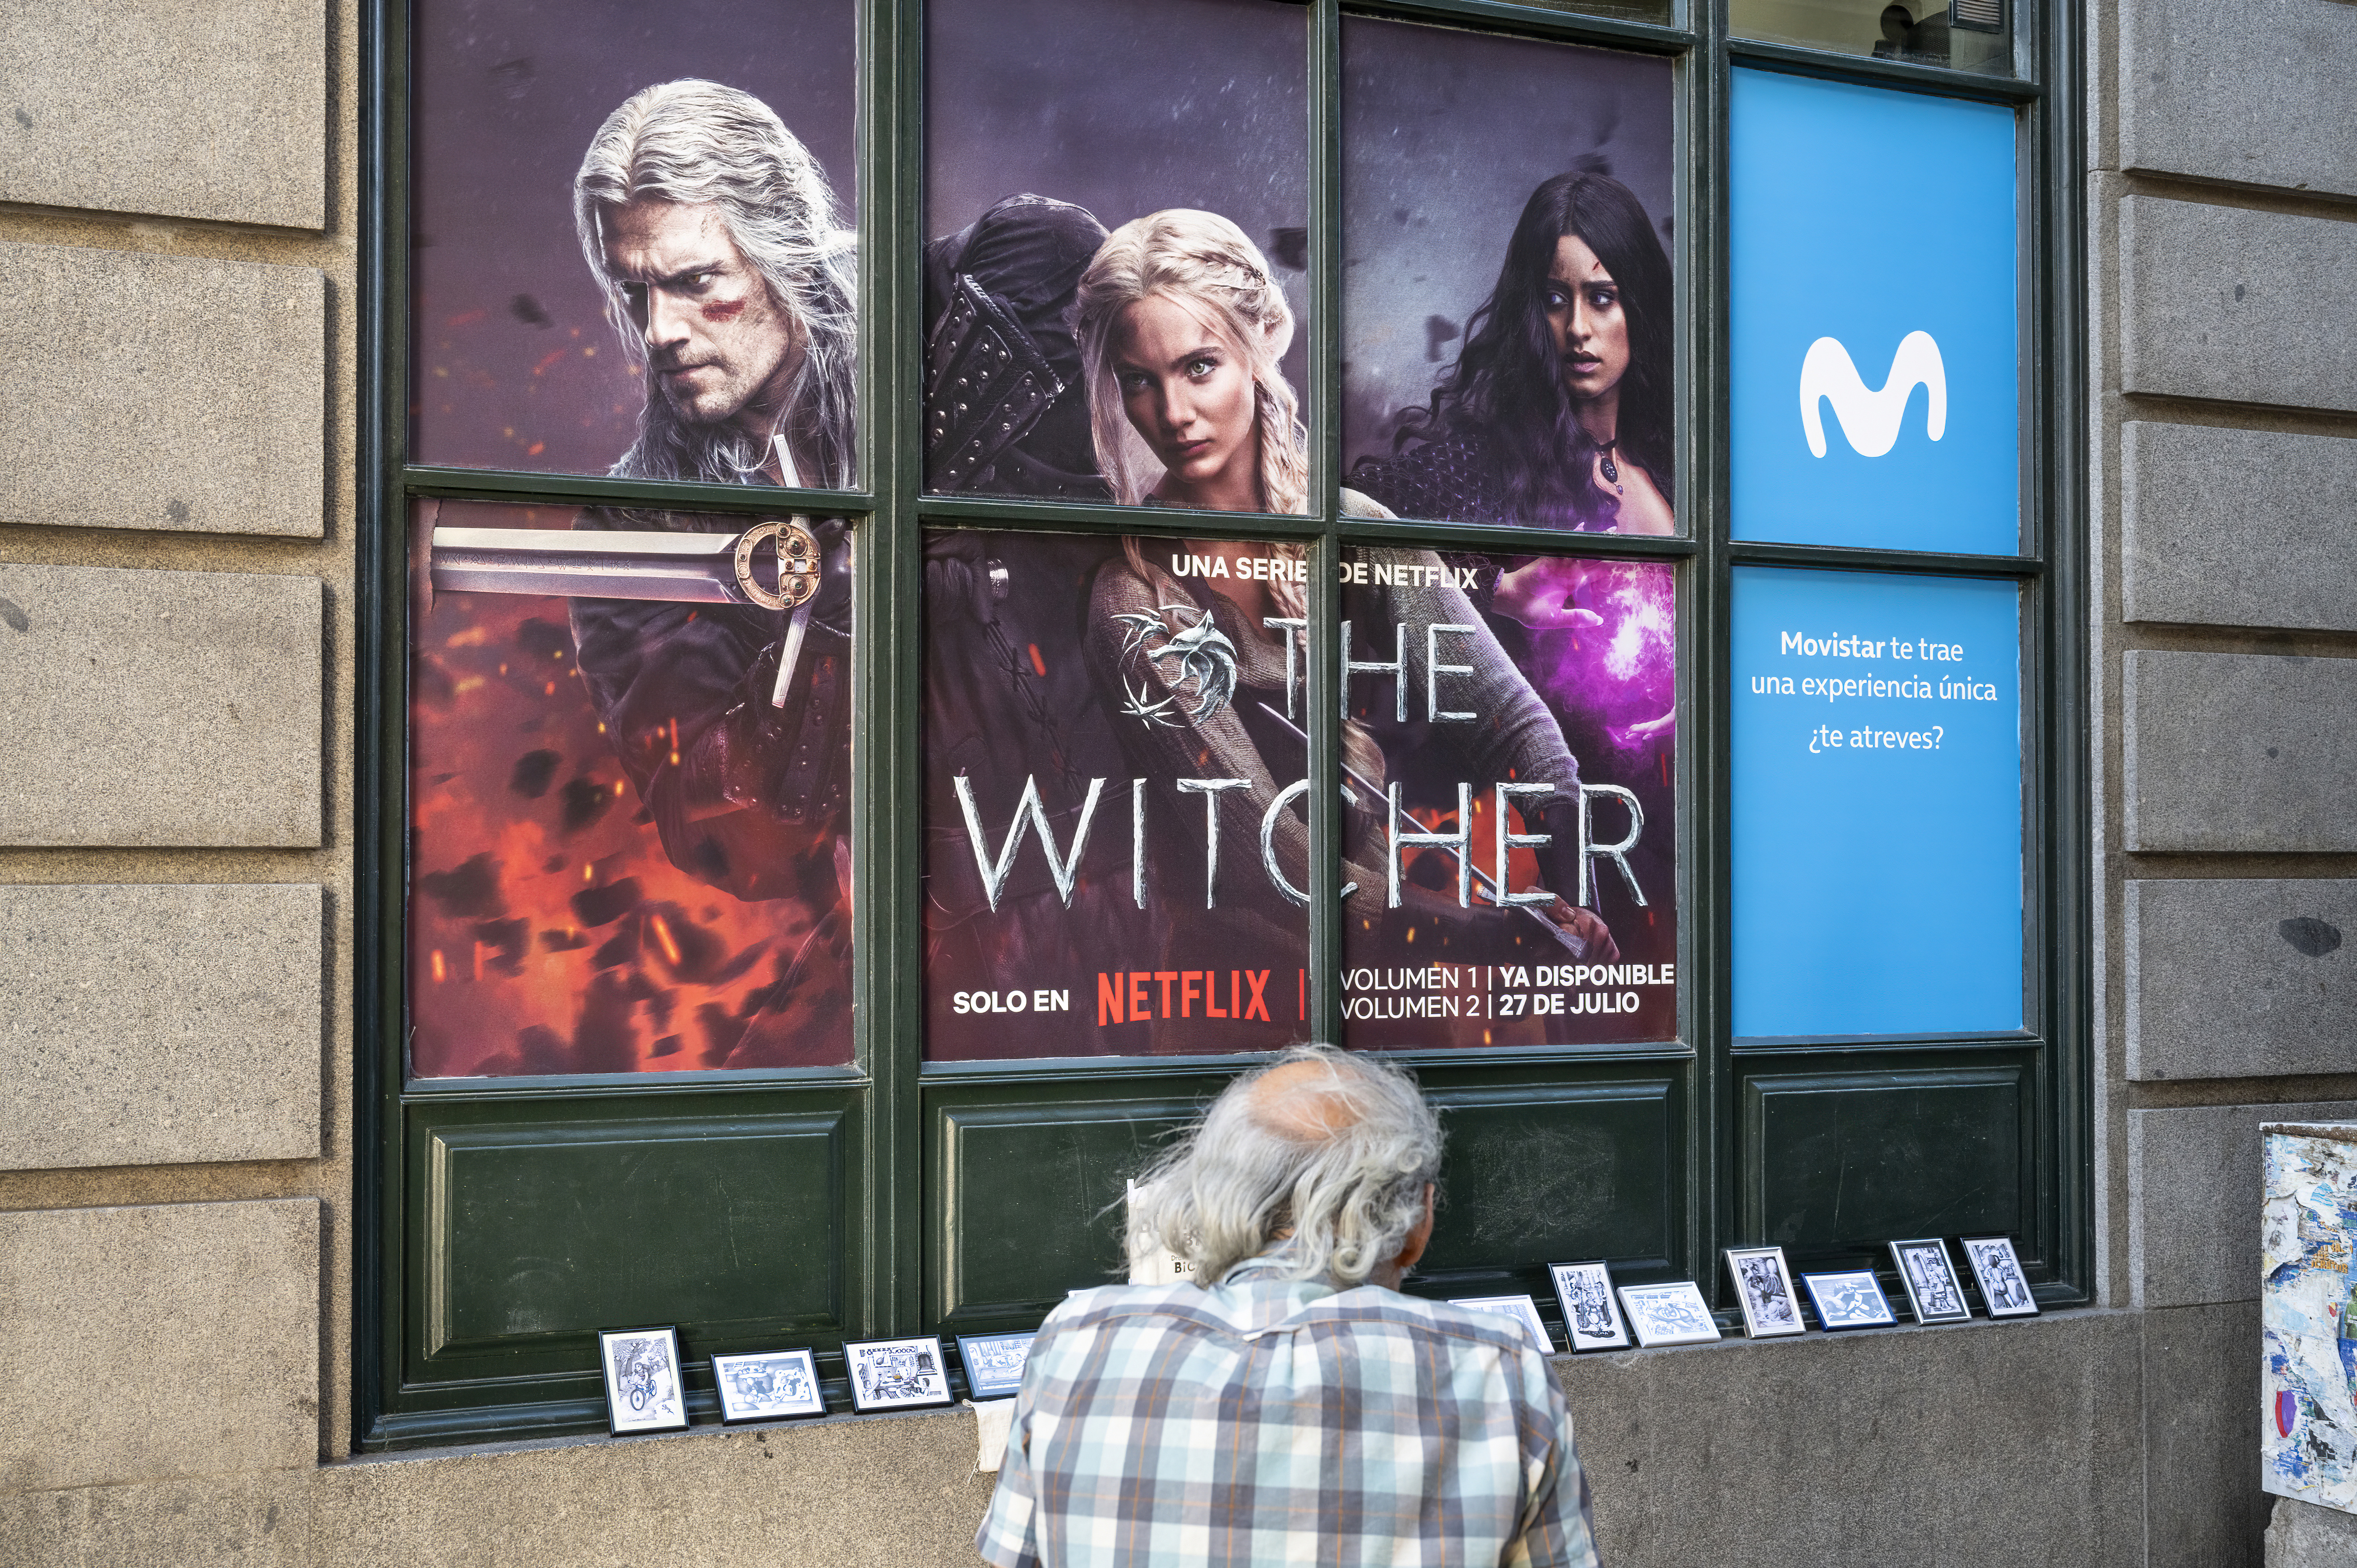 A Netflix street ad showcasing "The Witcher" in Spain. | Source: Getty Images